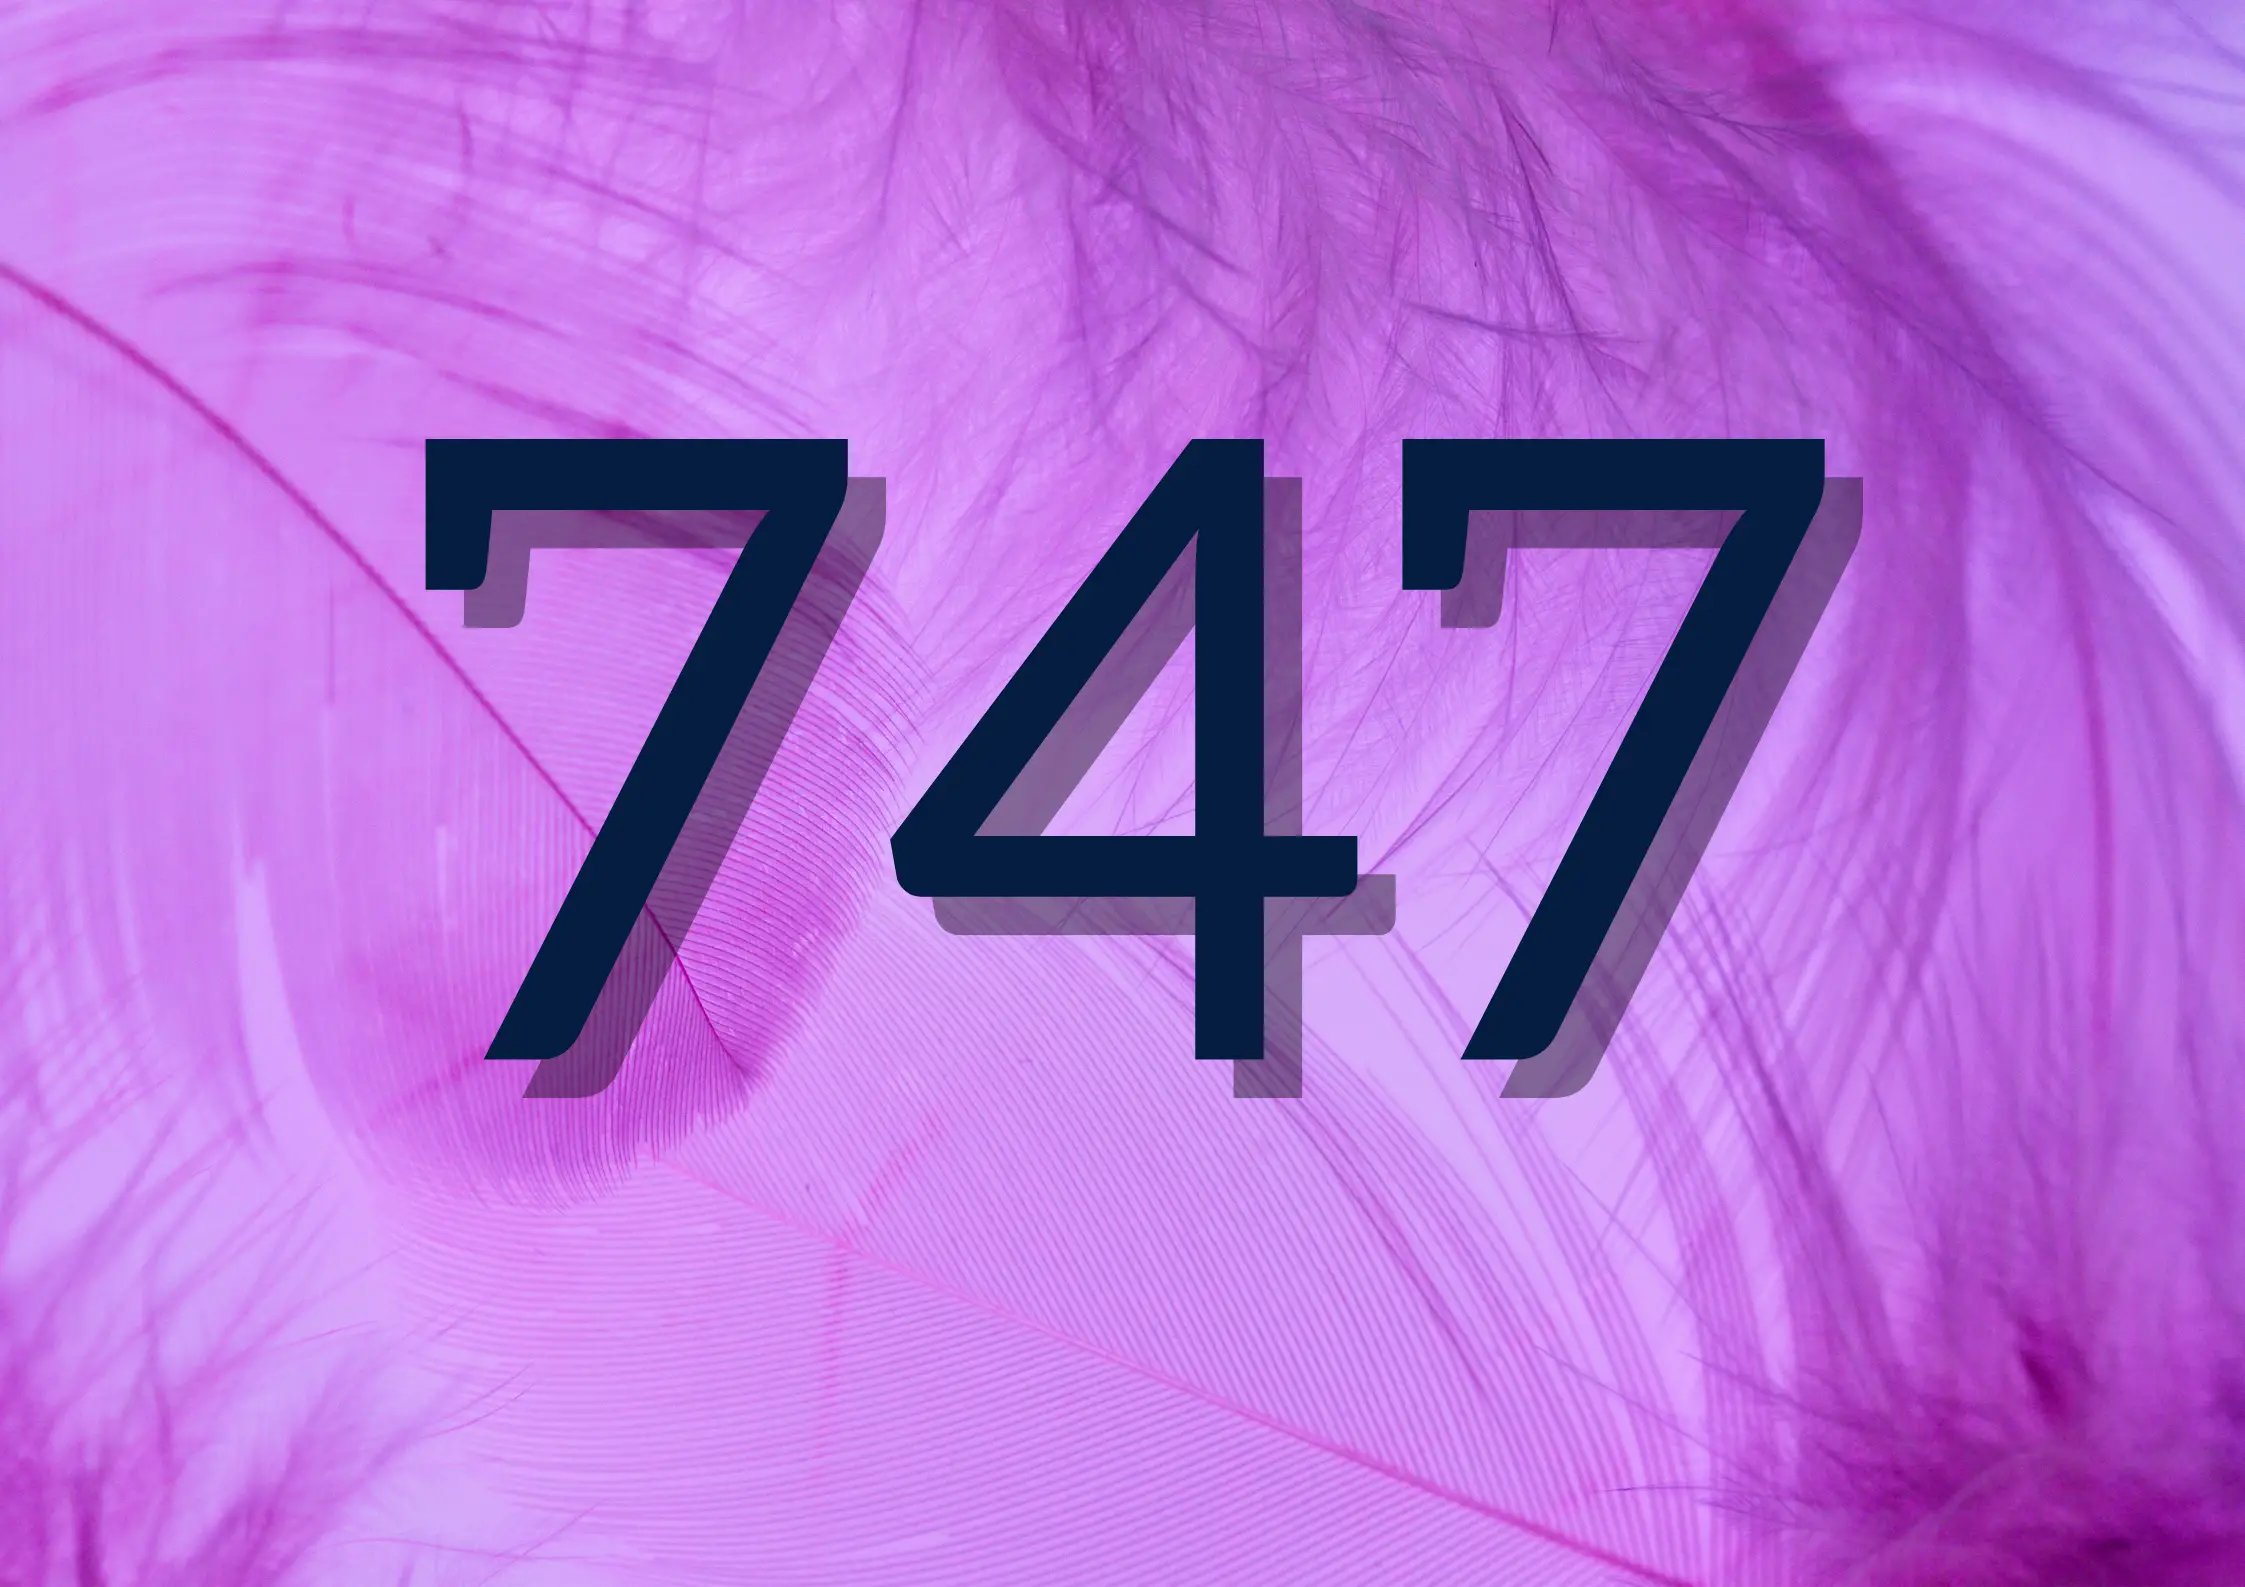 How Does 747 Twin Flame Number Manifest In Life?